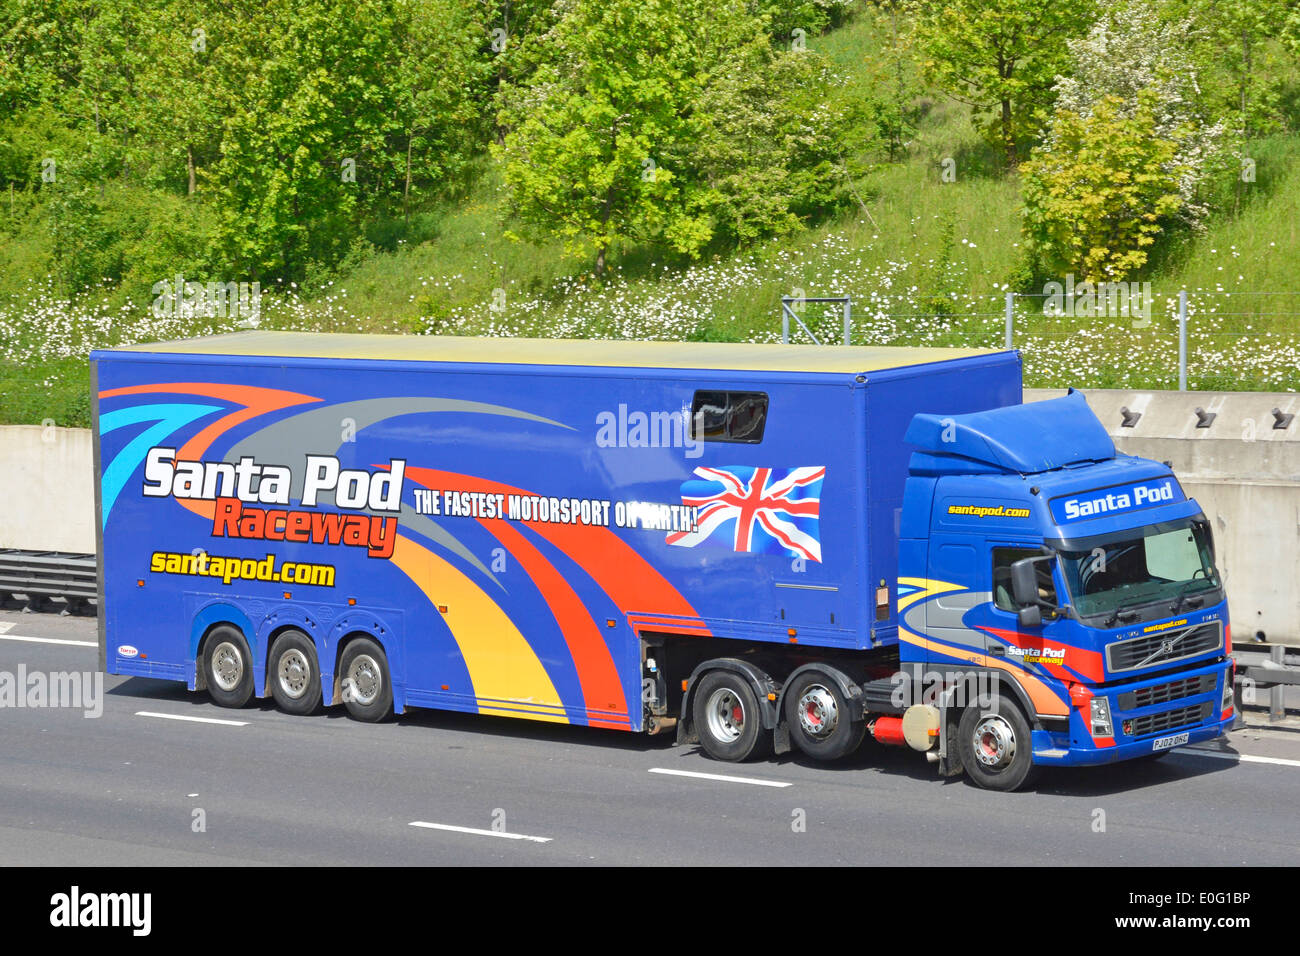 Side & front view of hgv lorry truck with advertising graphics for Santa Pod Raceway on articulated trailer driving along M25 motorway England UK Stock Photo